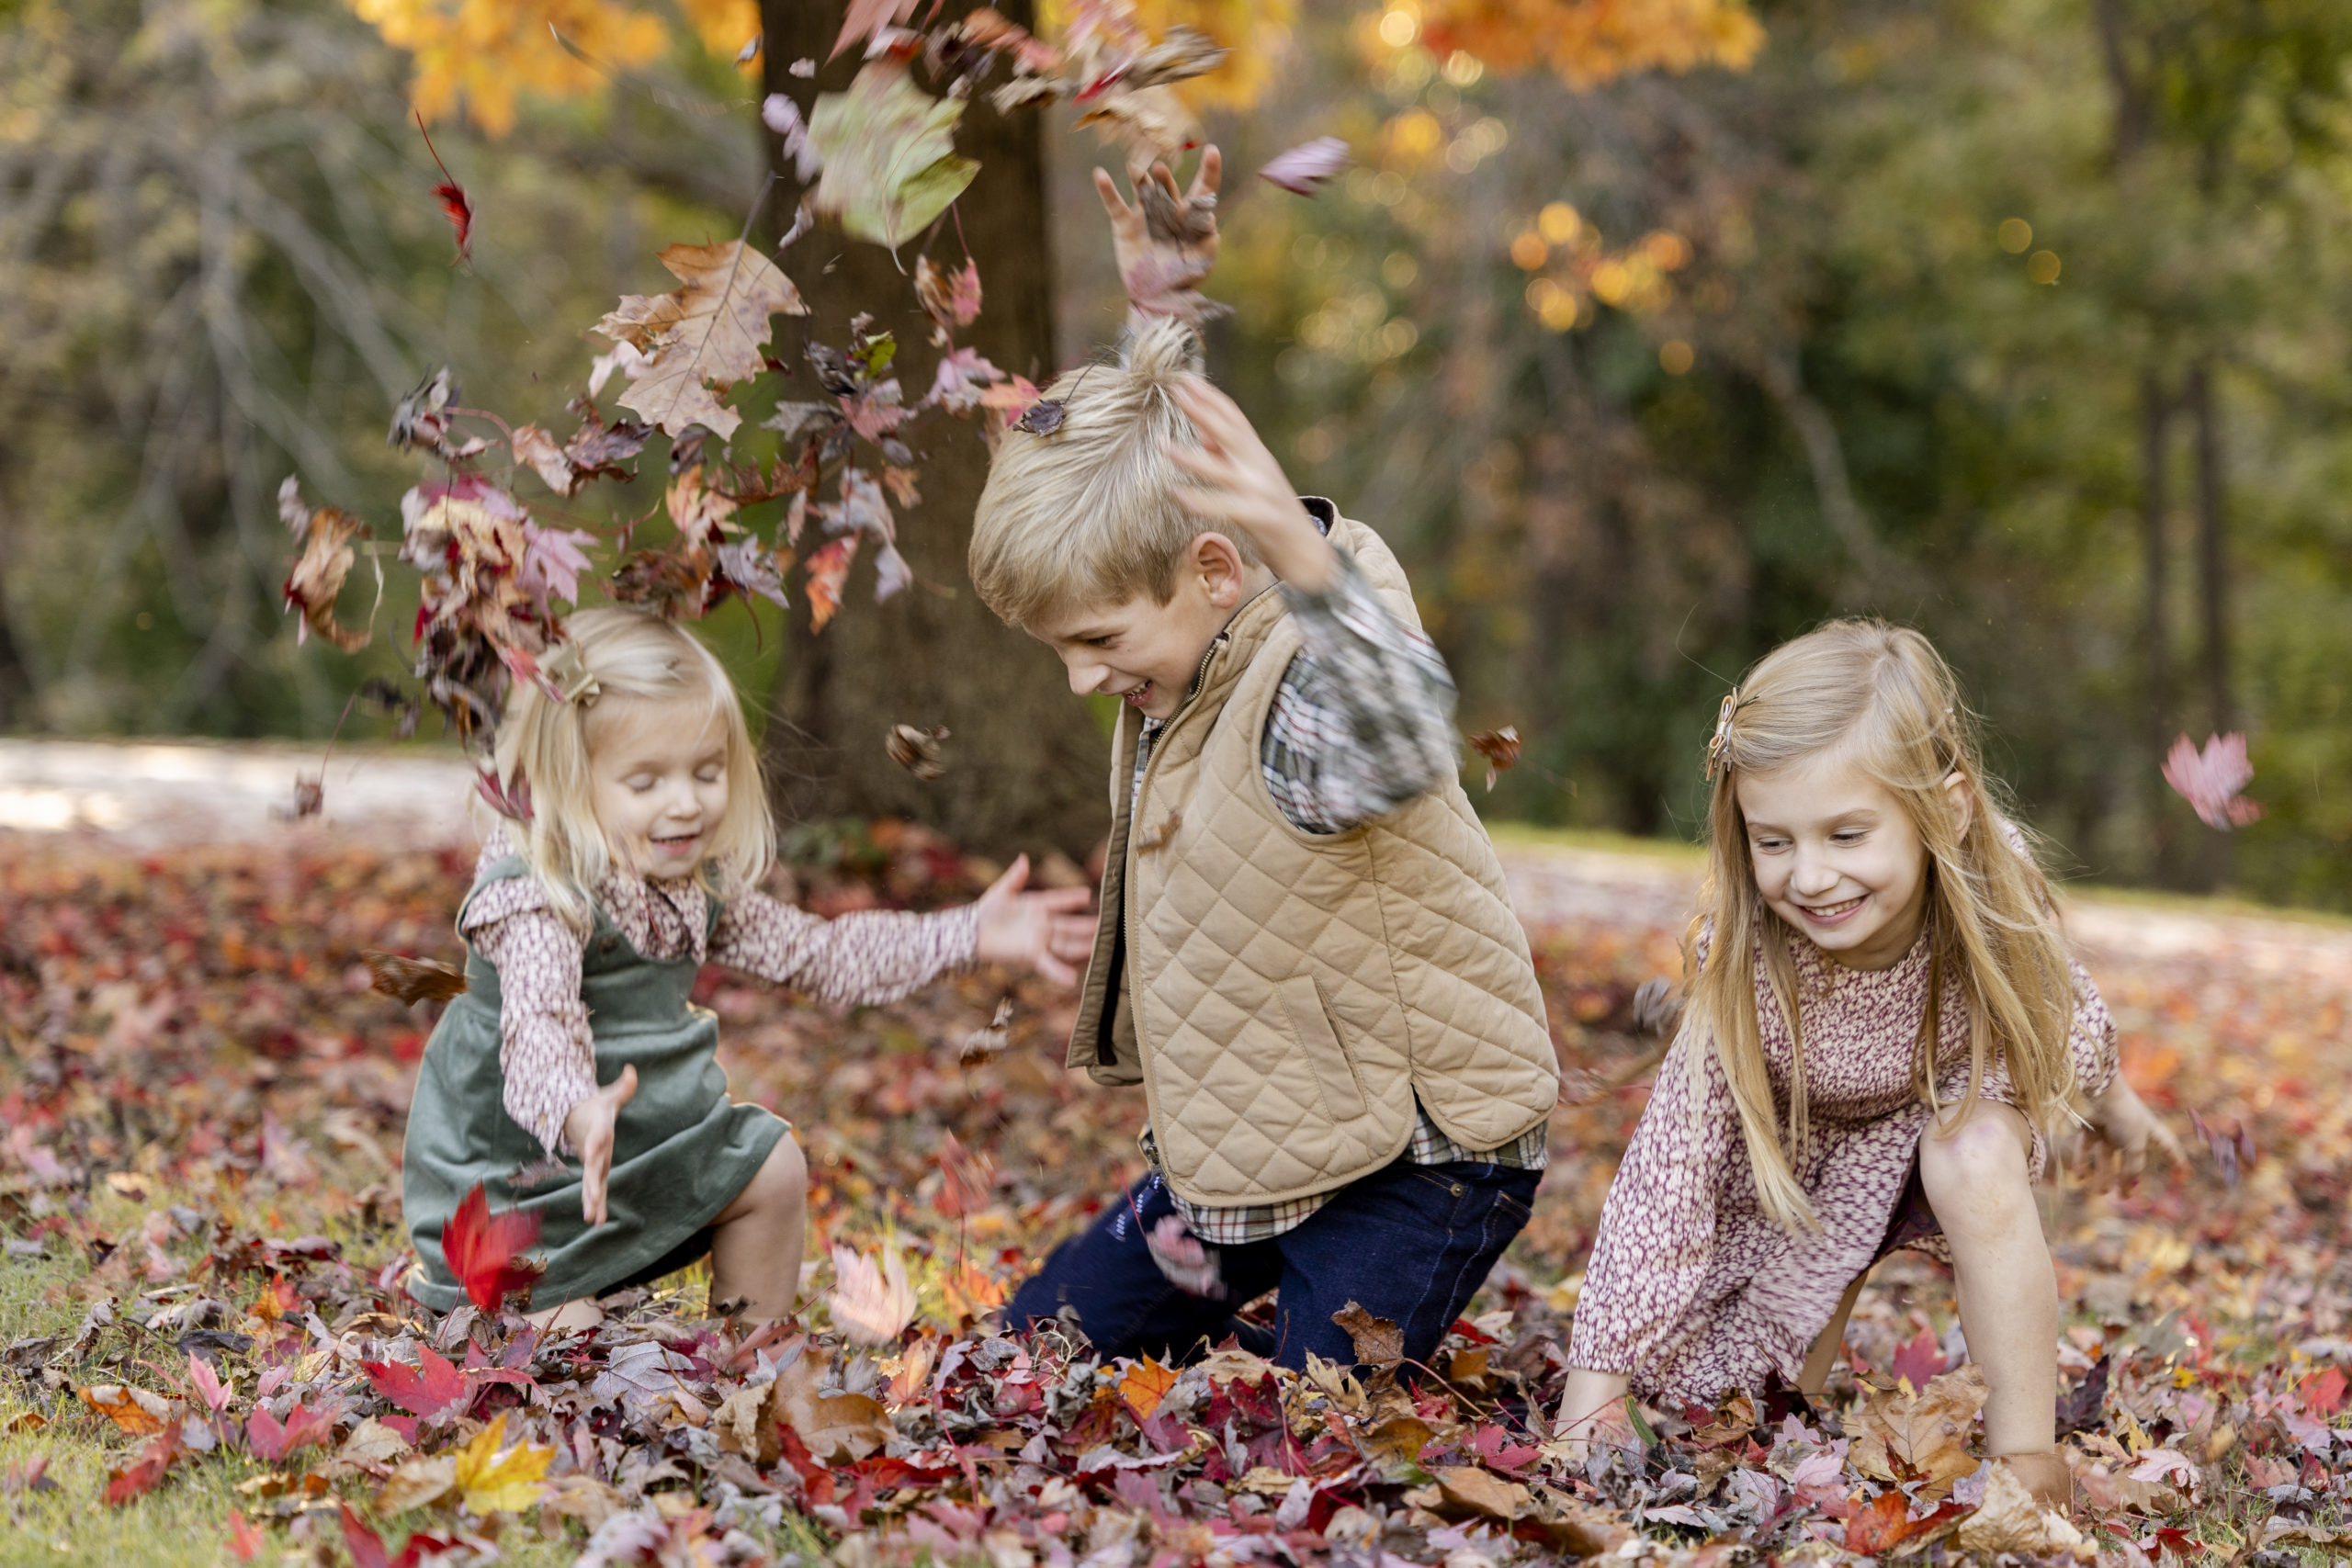 Kids throwing leaves for their fall family photo session